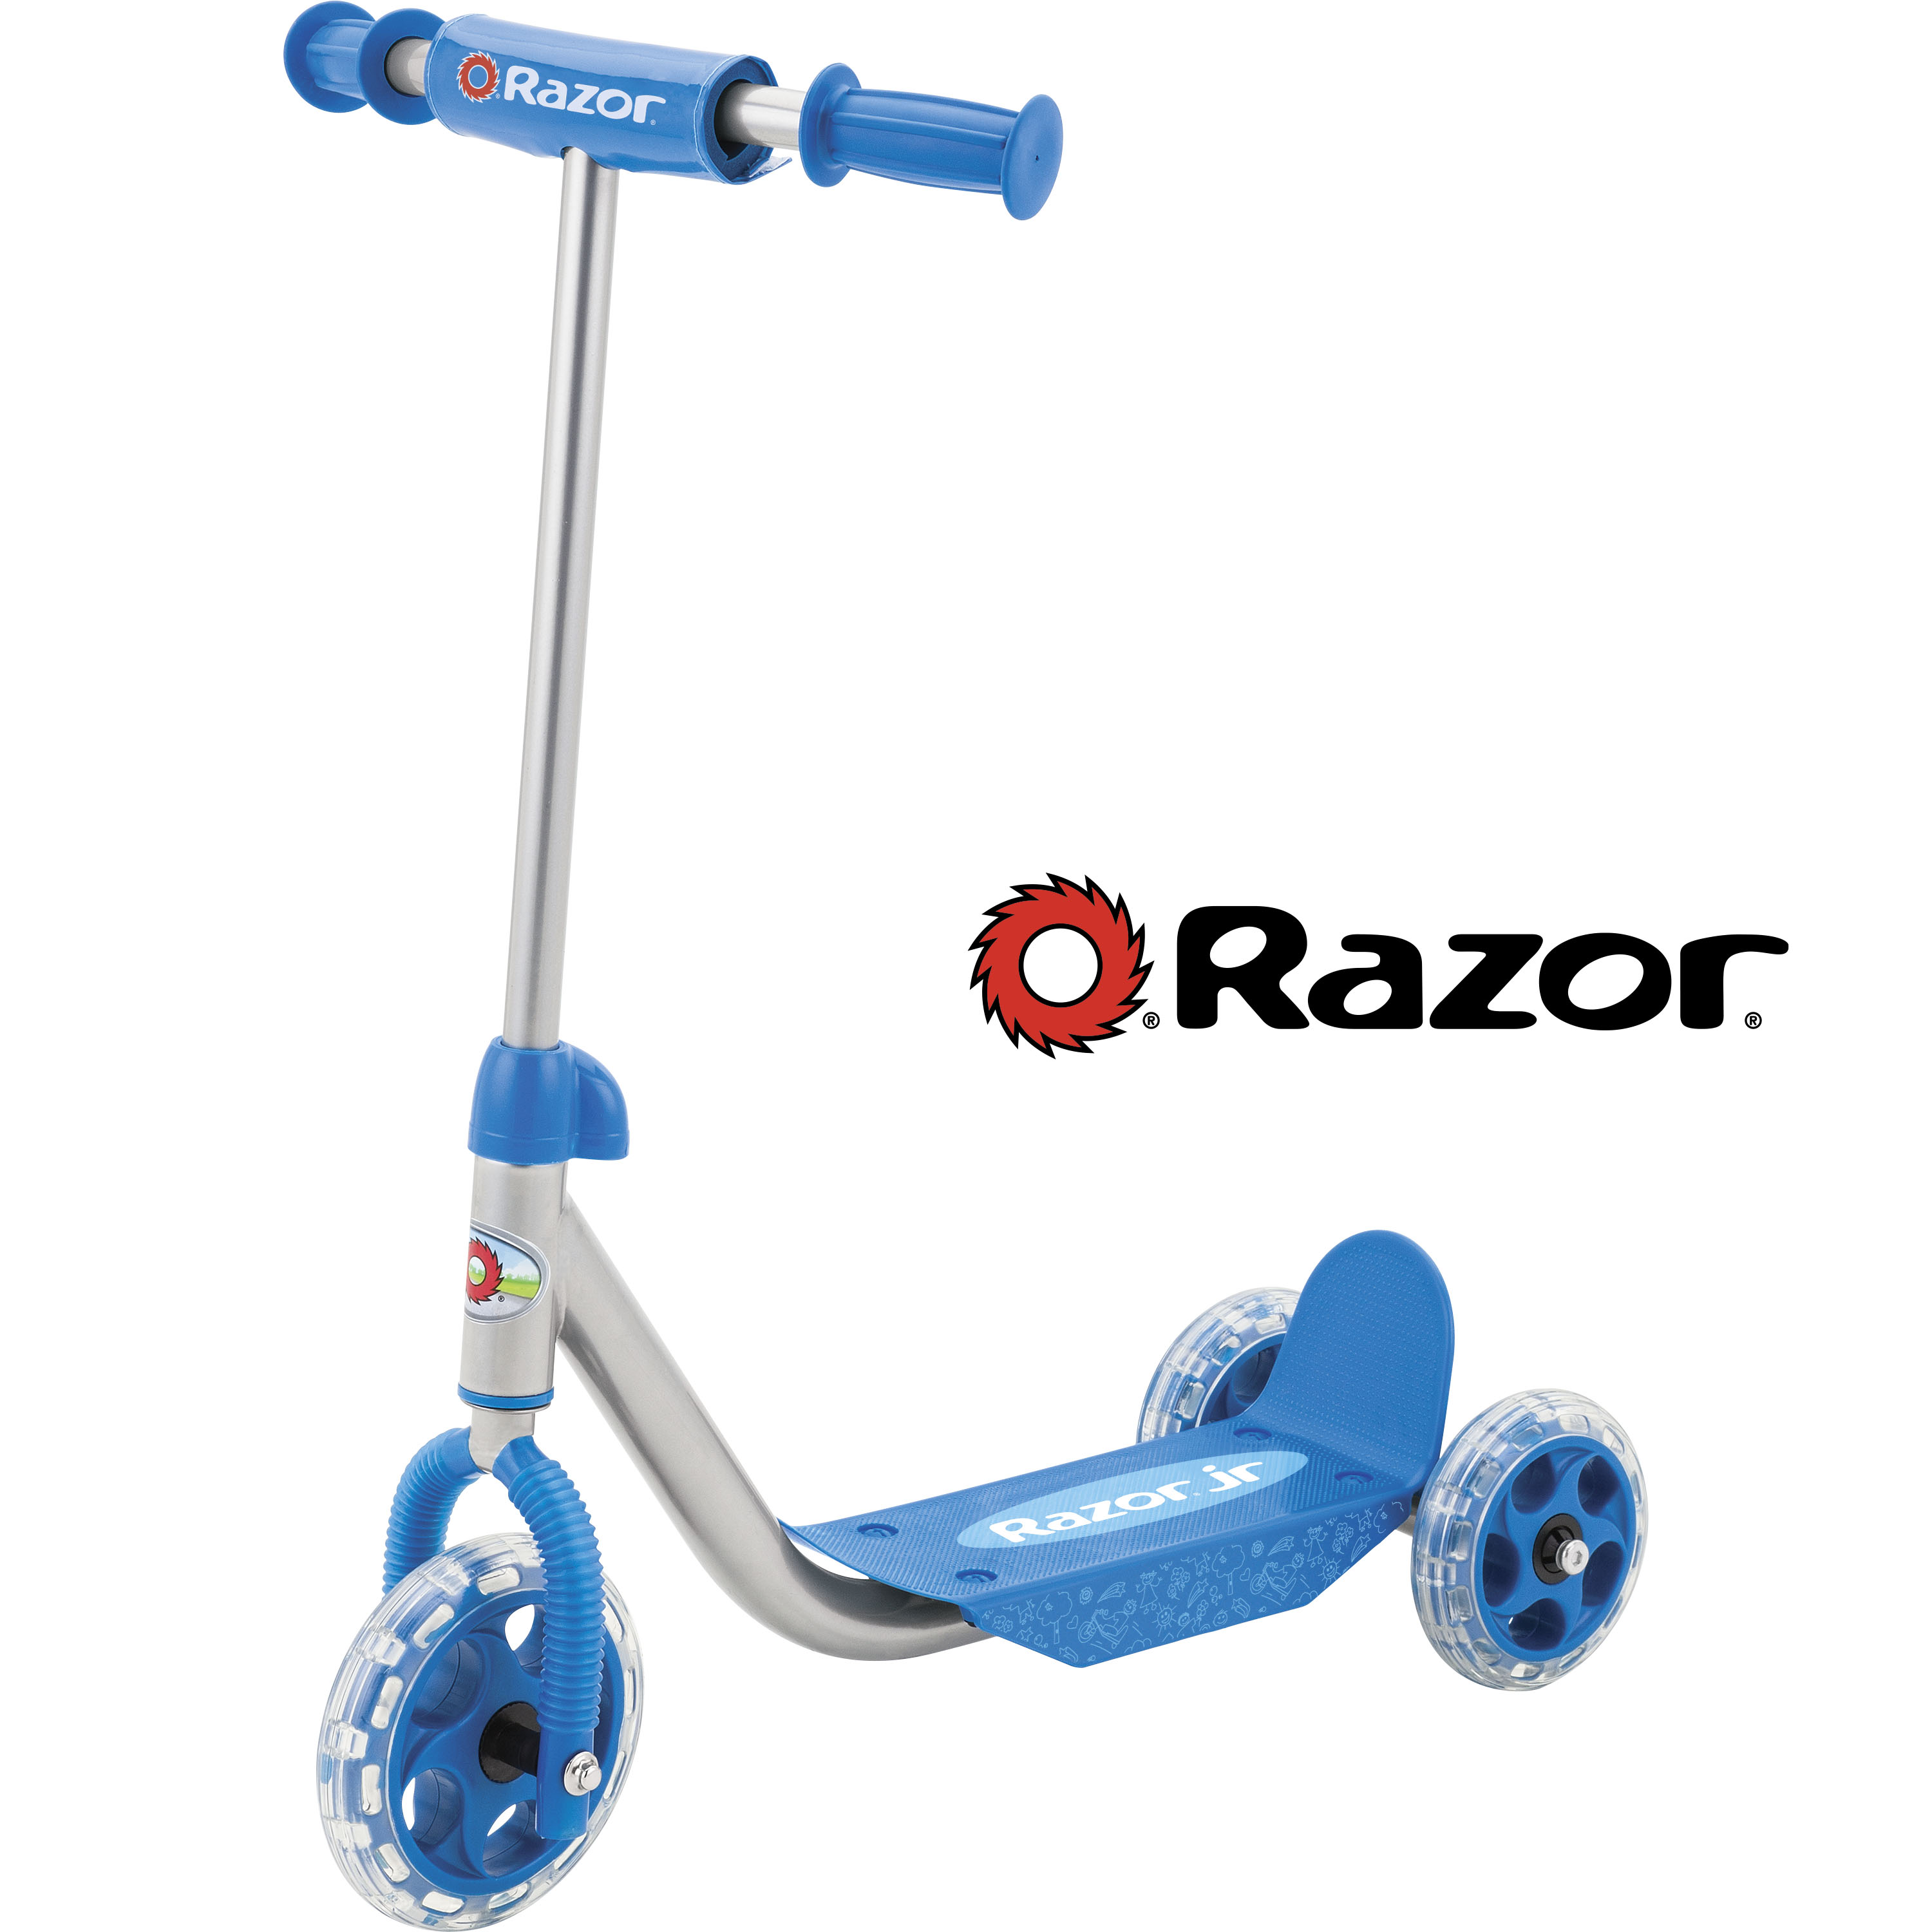 Razor Jr 3-Wheel Lil' Kick Scooter - For Ages 3 and up, Blue - image 1 of 9